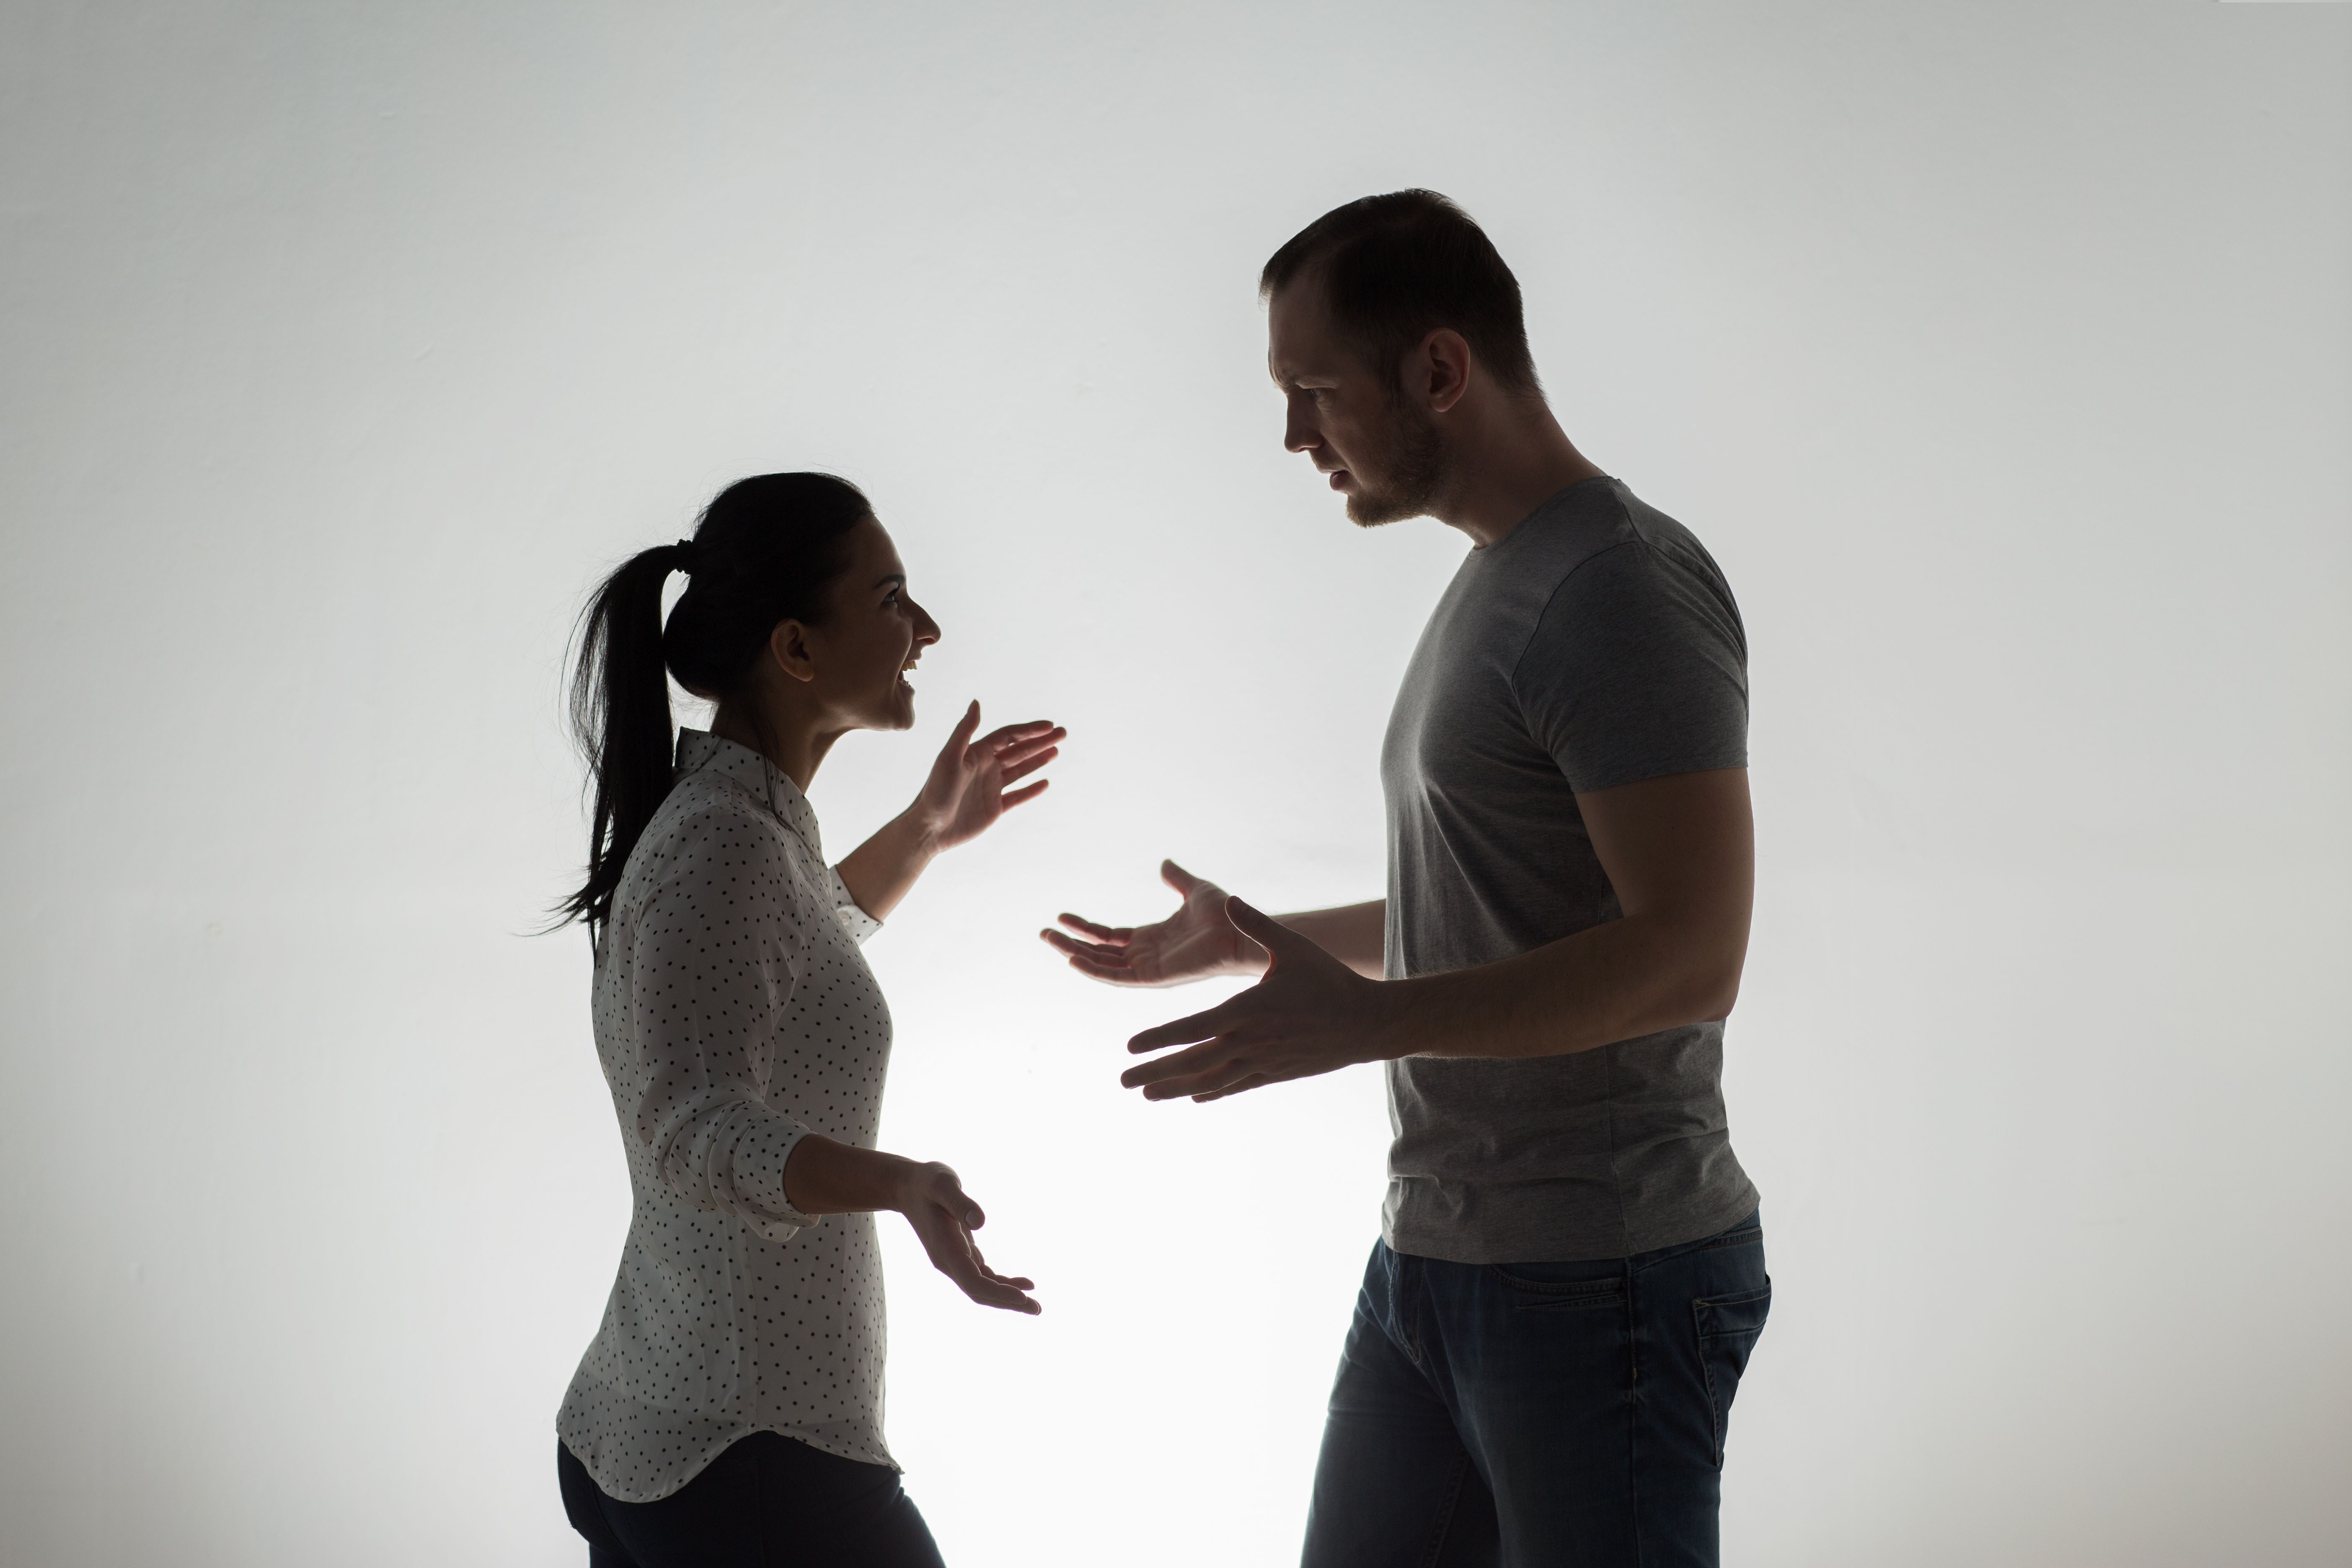 Husband and wife arguing | Source: Shutterstock